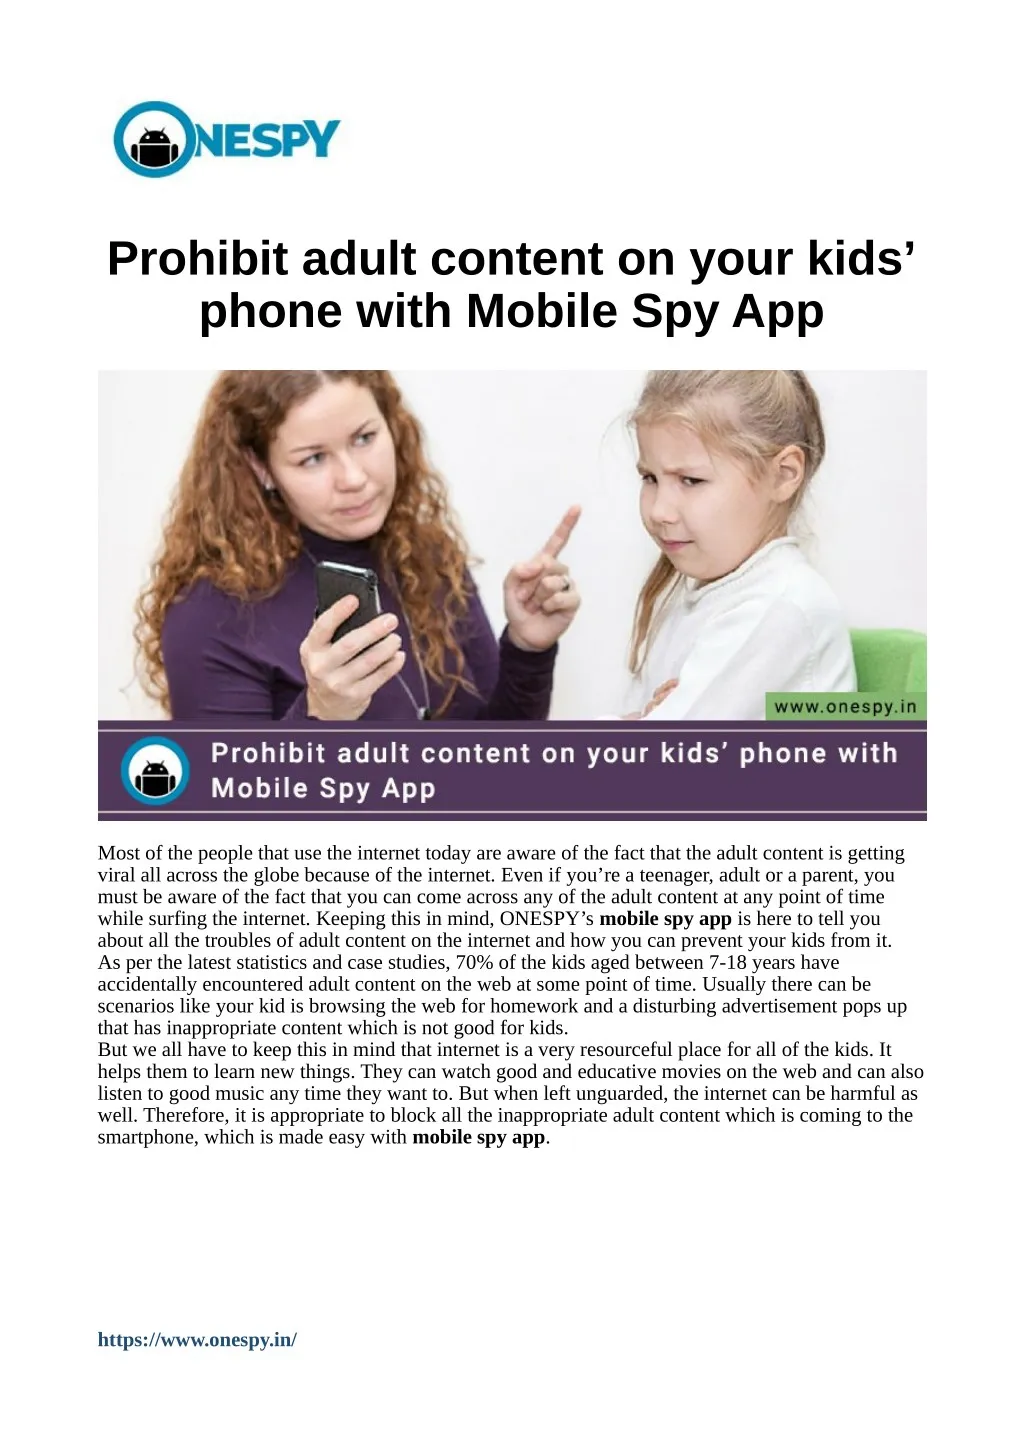 prohibit adult content on your kids phone with